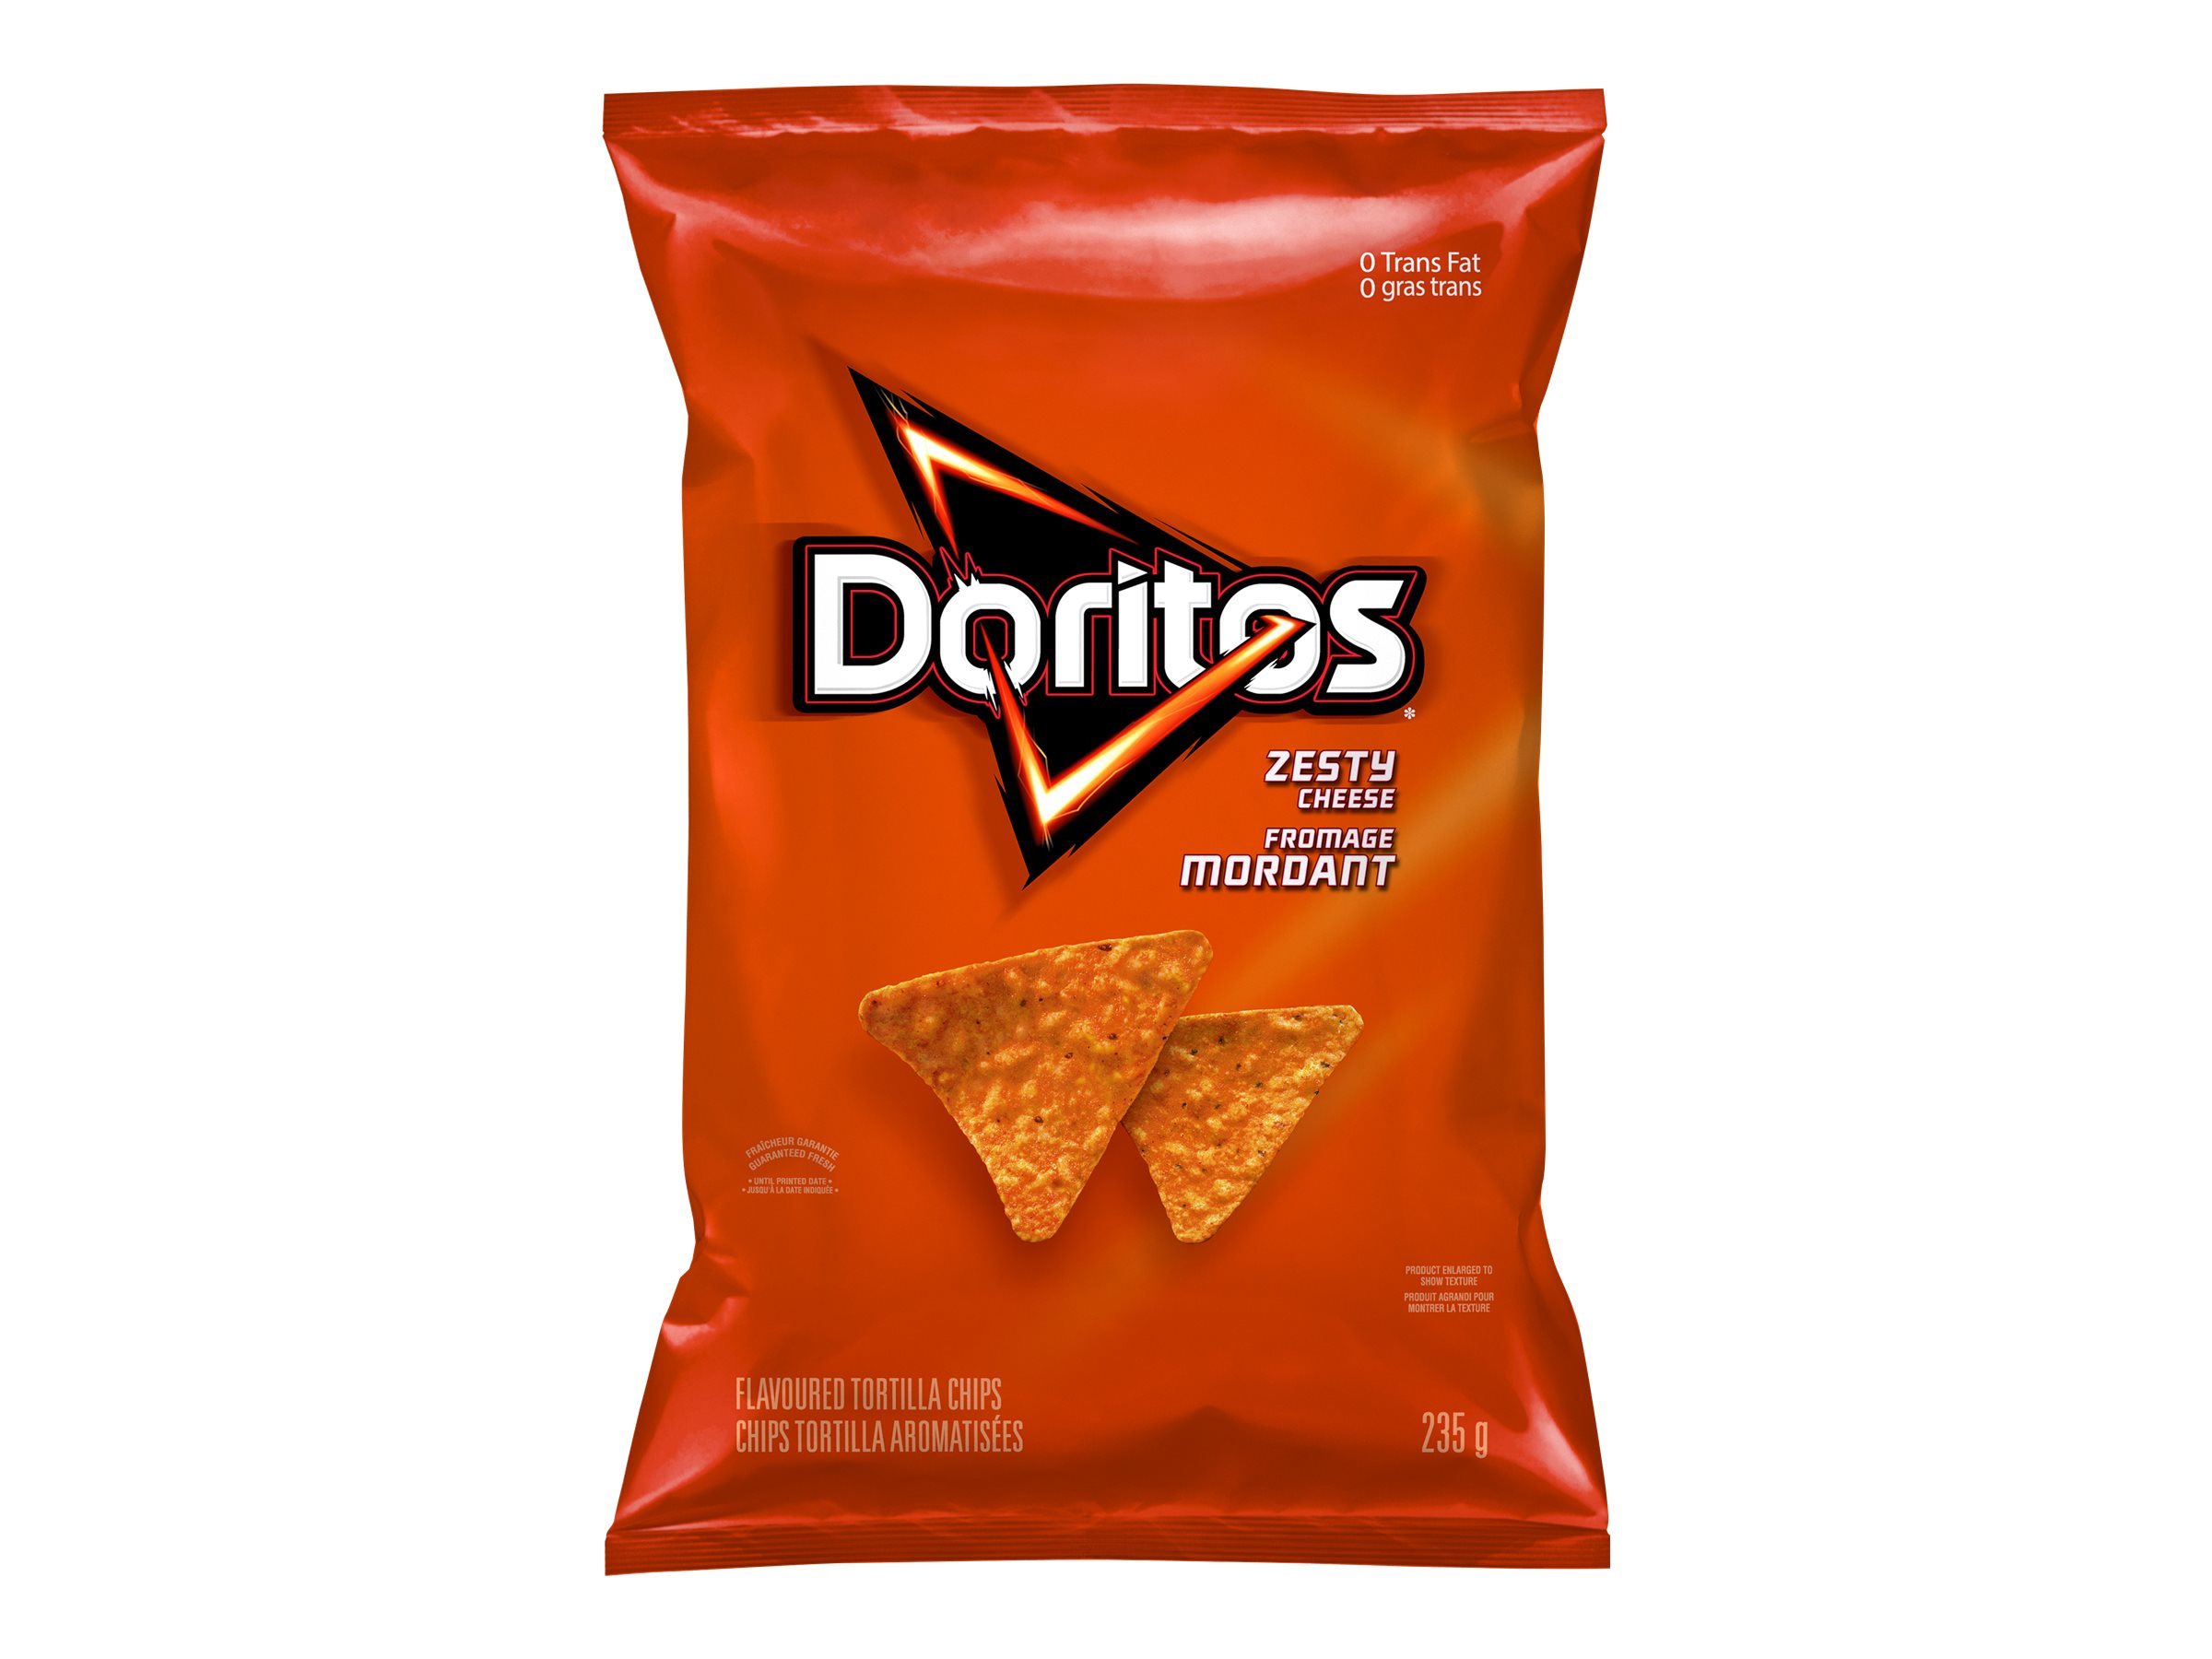 20-crunchy-facts-about-doritos-ingredients